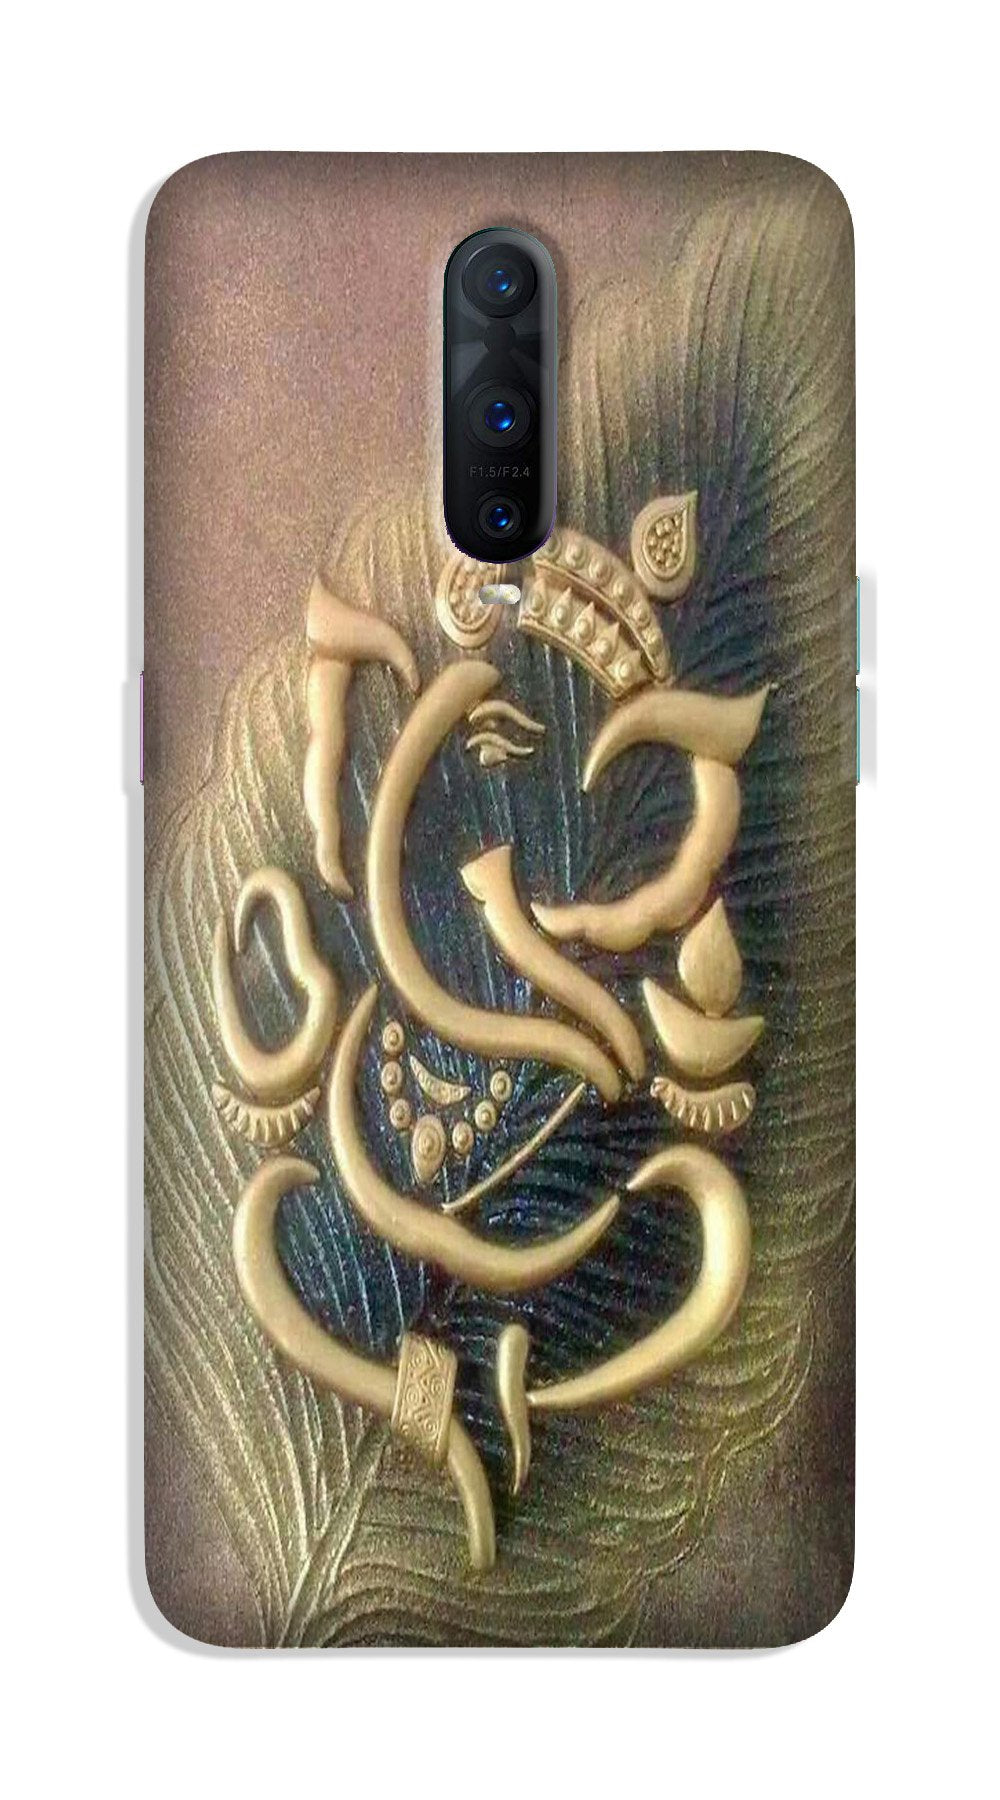 Lord Ganesha Case for OnePlus 7 Pro